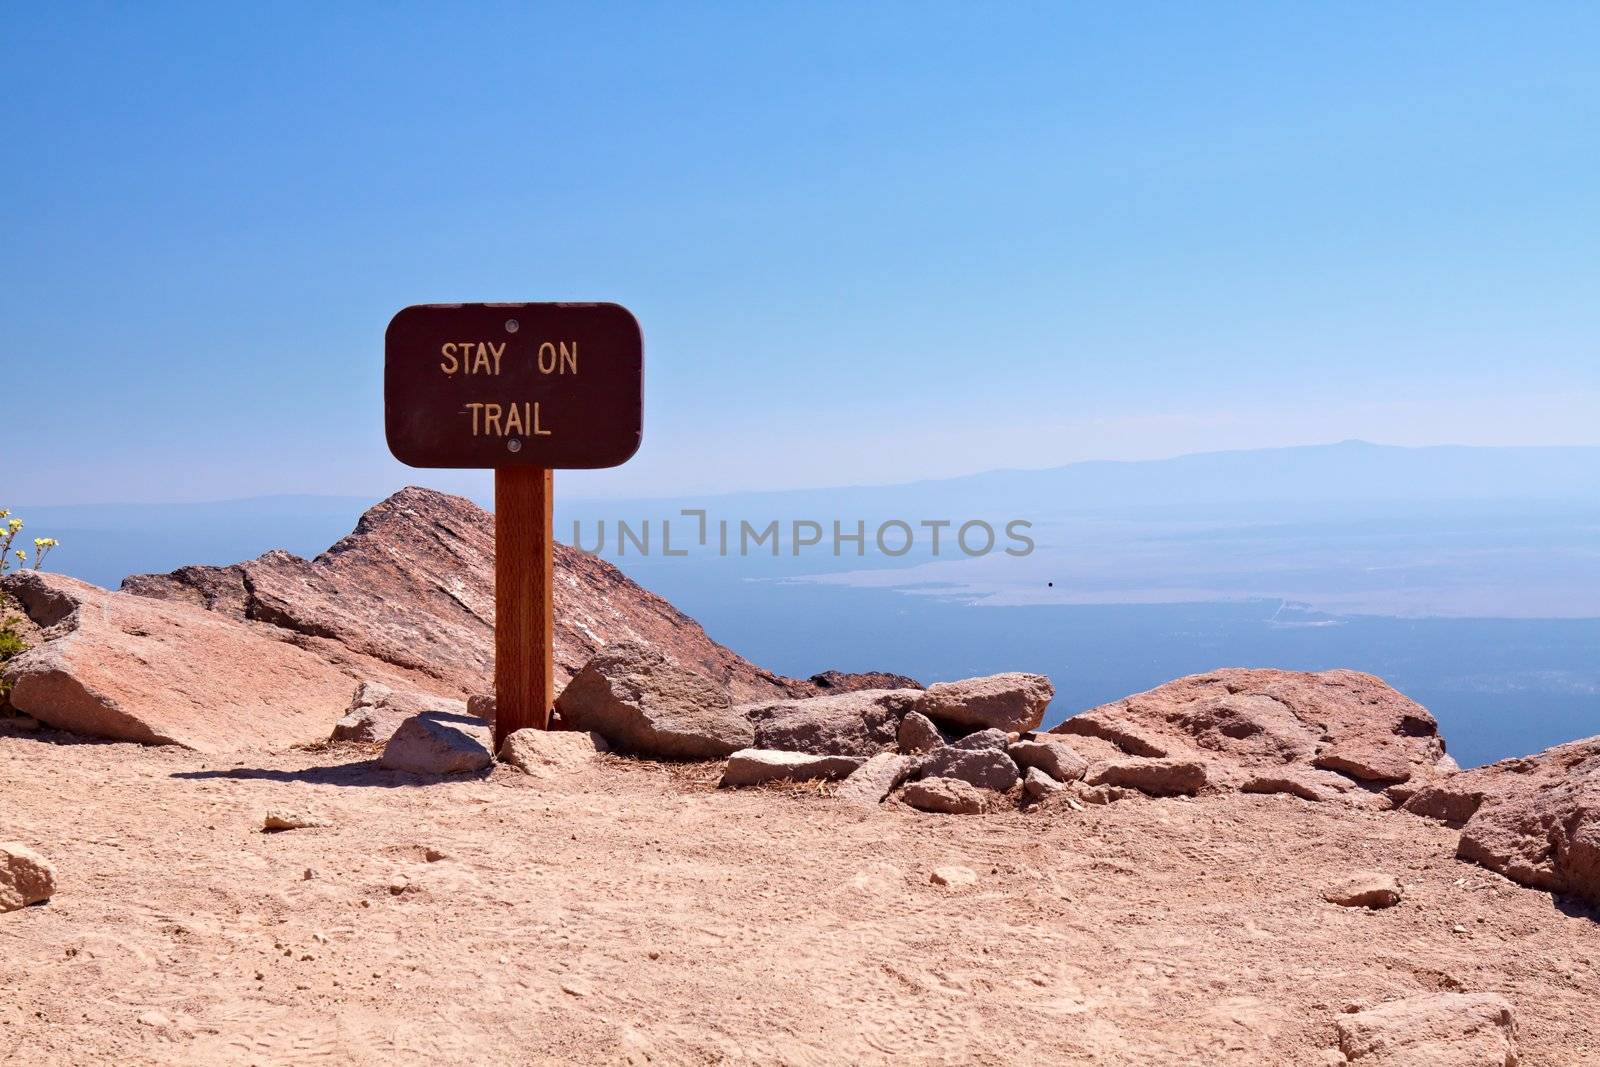 Stay on Trail sign, Crater Lake National Park, Oregon, United States